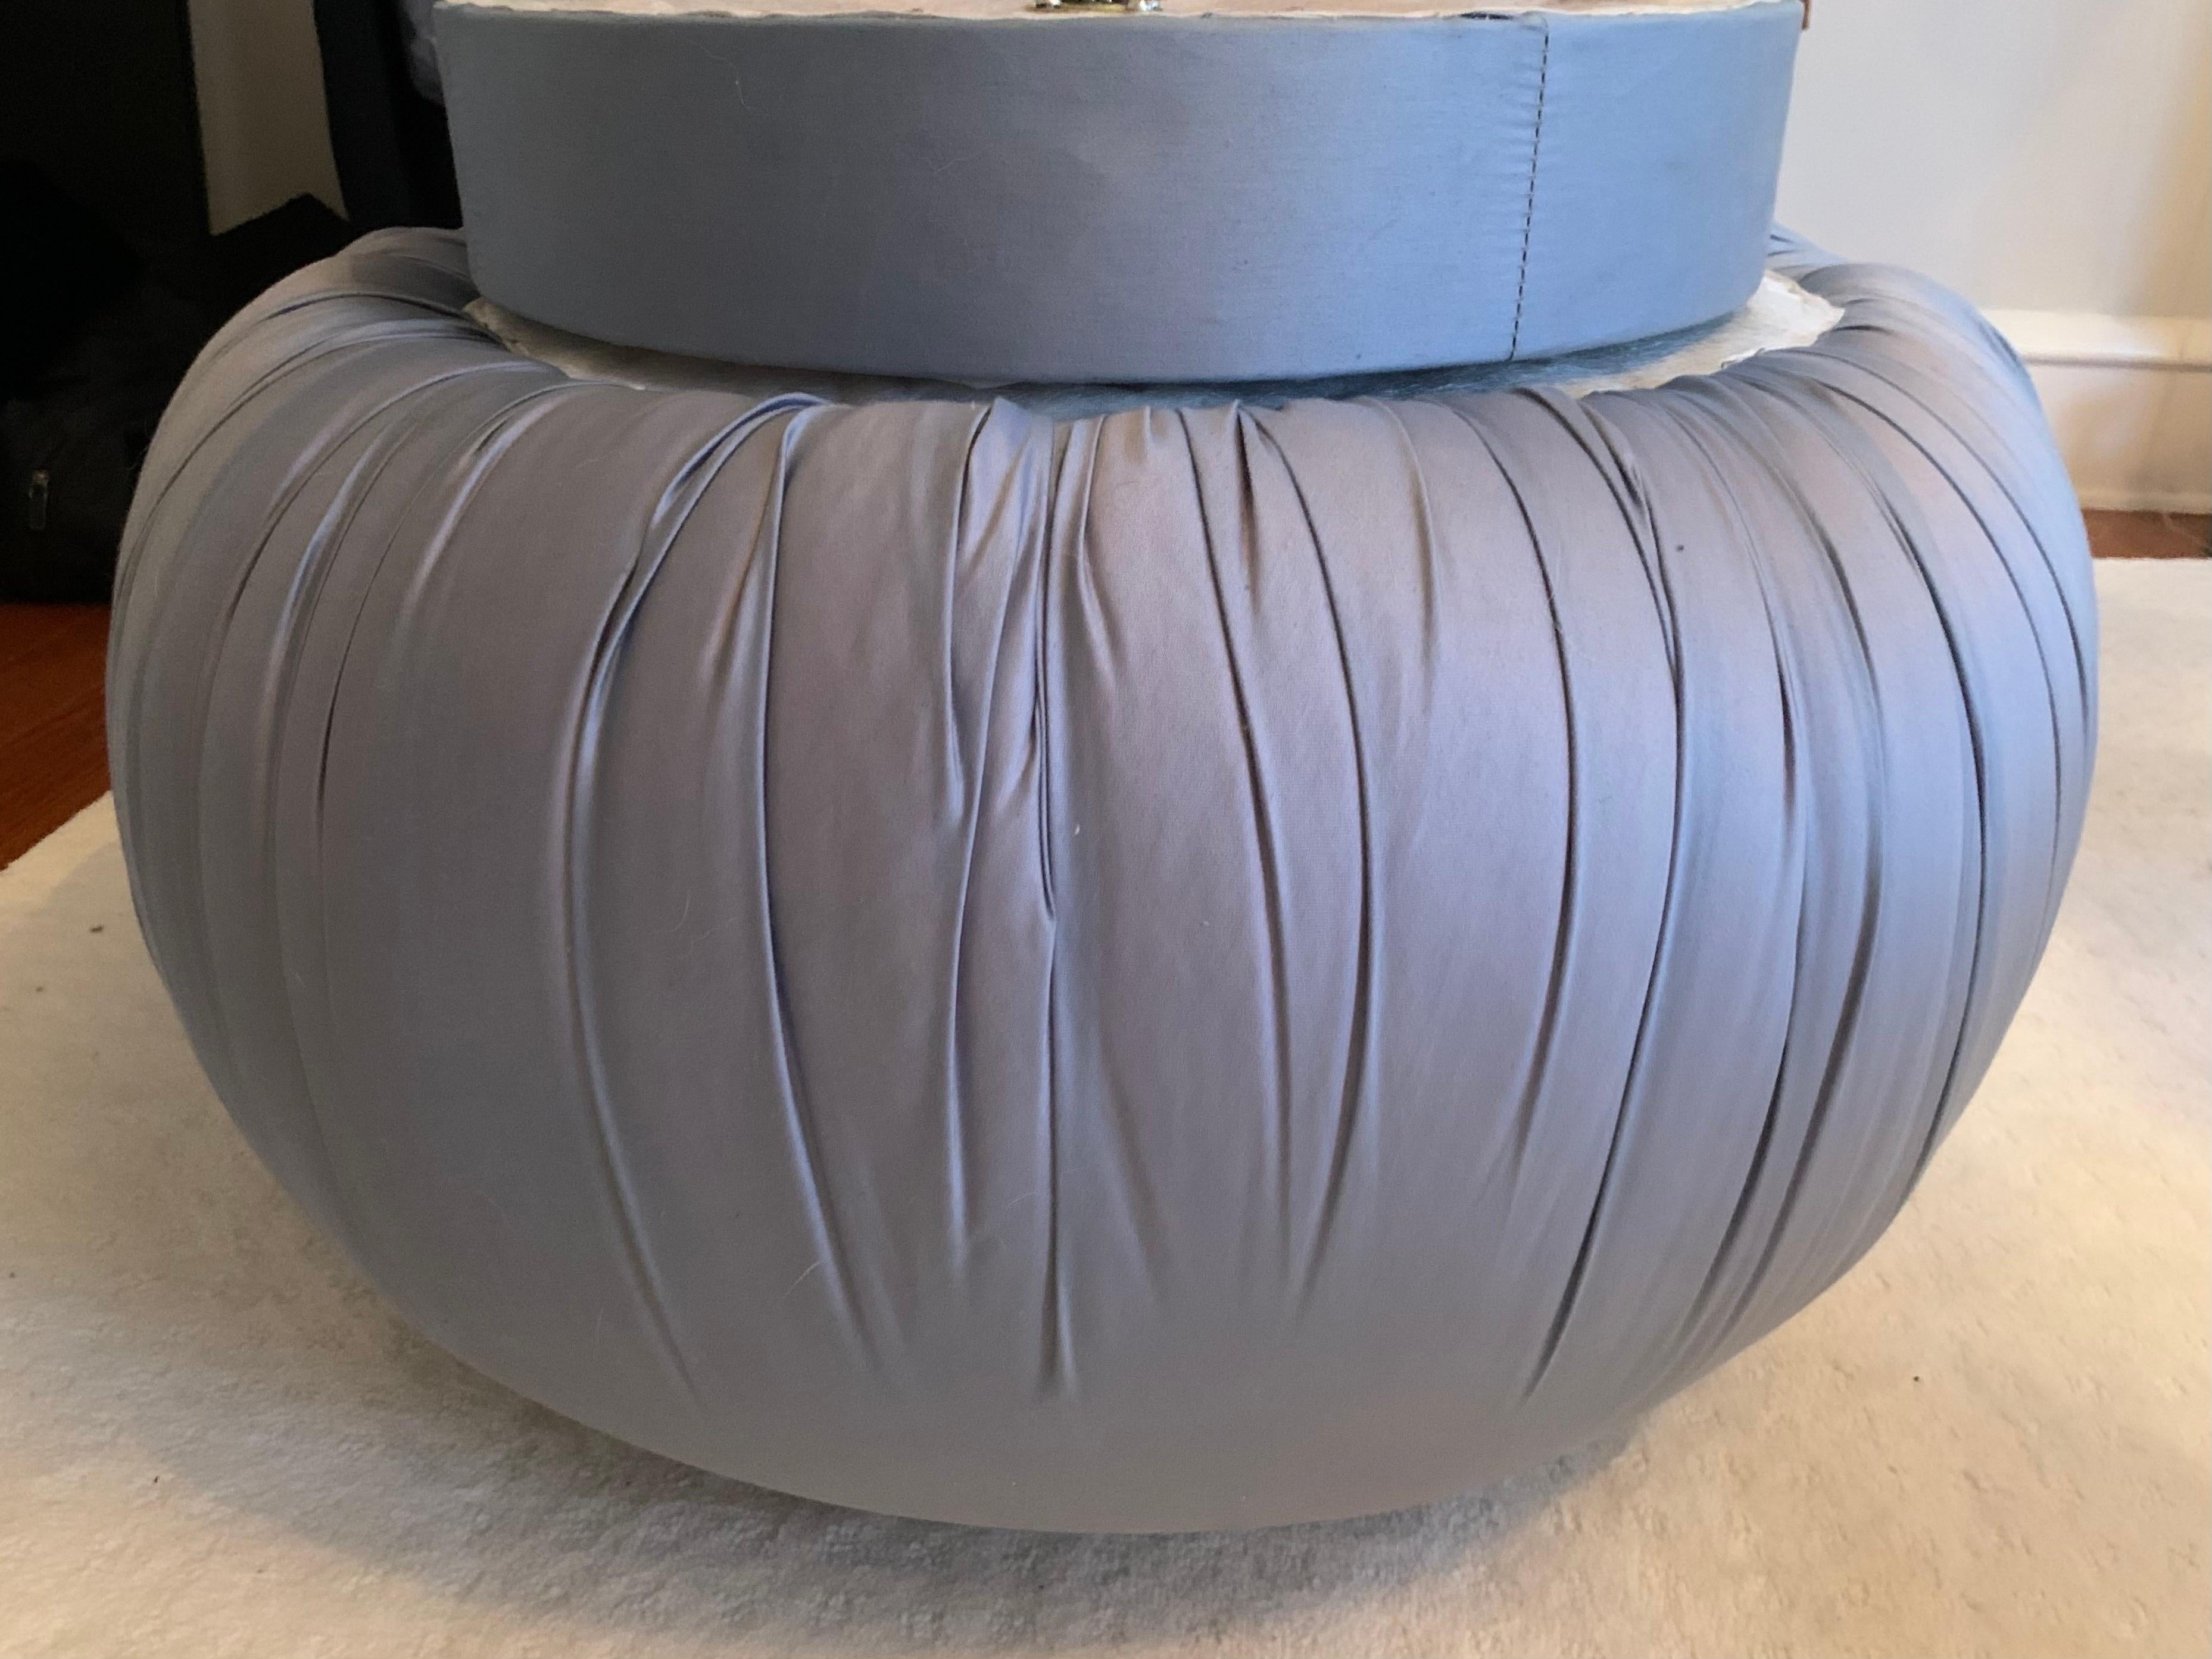 1990s Postmodern Round Pouf Ottoman Footstool attr. to Kagan for Directional In Good Condition For Sale In West Reading, PA